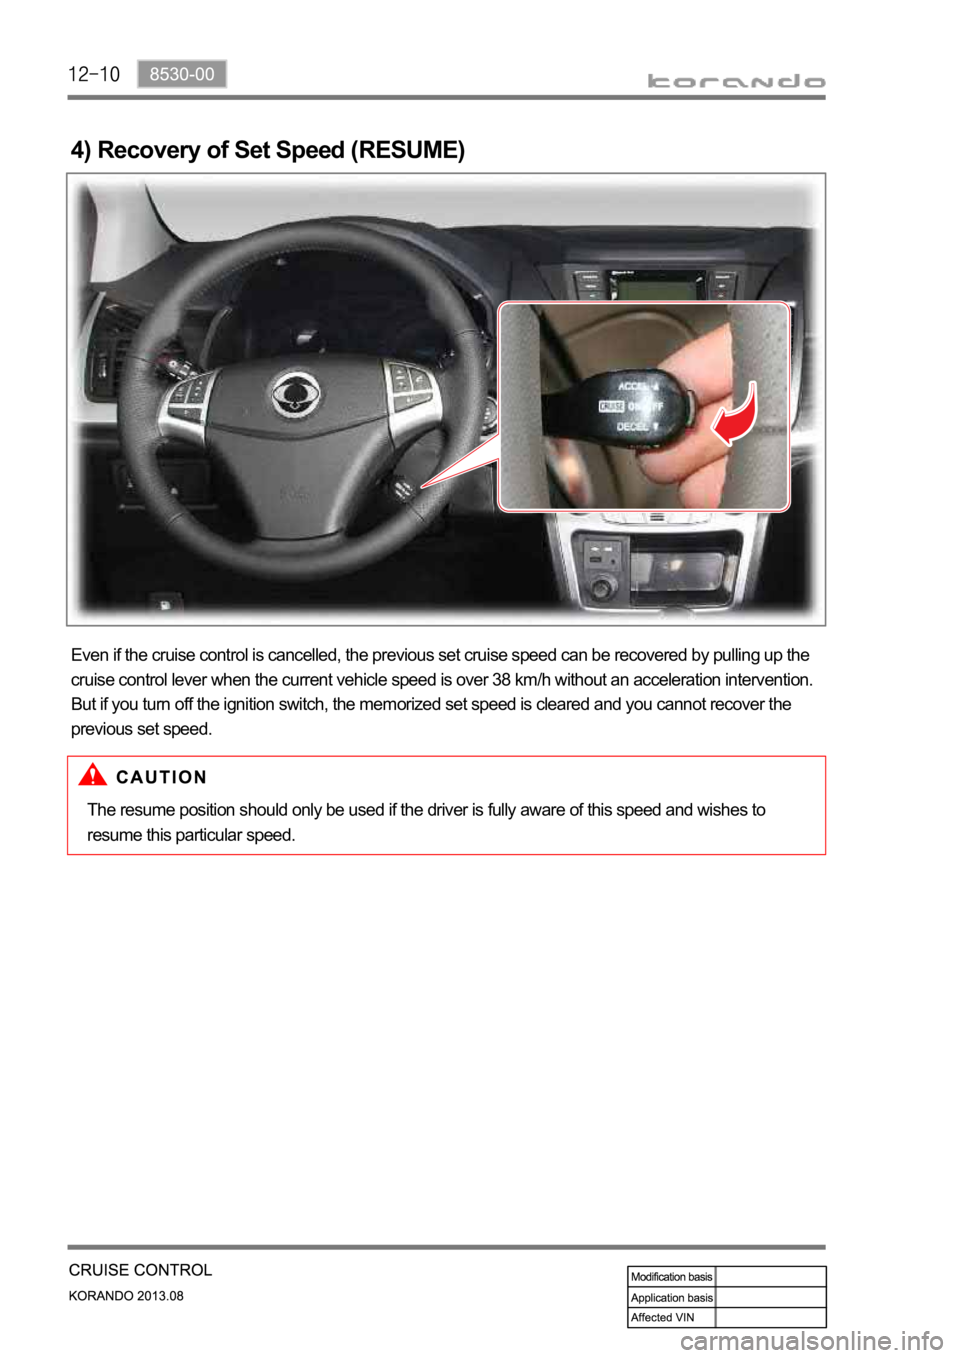 SSANGYONG KORANDO 2013  Service Manual 4) Recovery of Set Speed (RESUME)
Even if the cruise control is cancelled, the previous set cruise speed can be recovered by pulling up the 
cruise control lever when the current vehicle speed is over